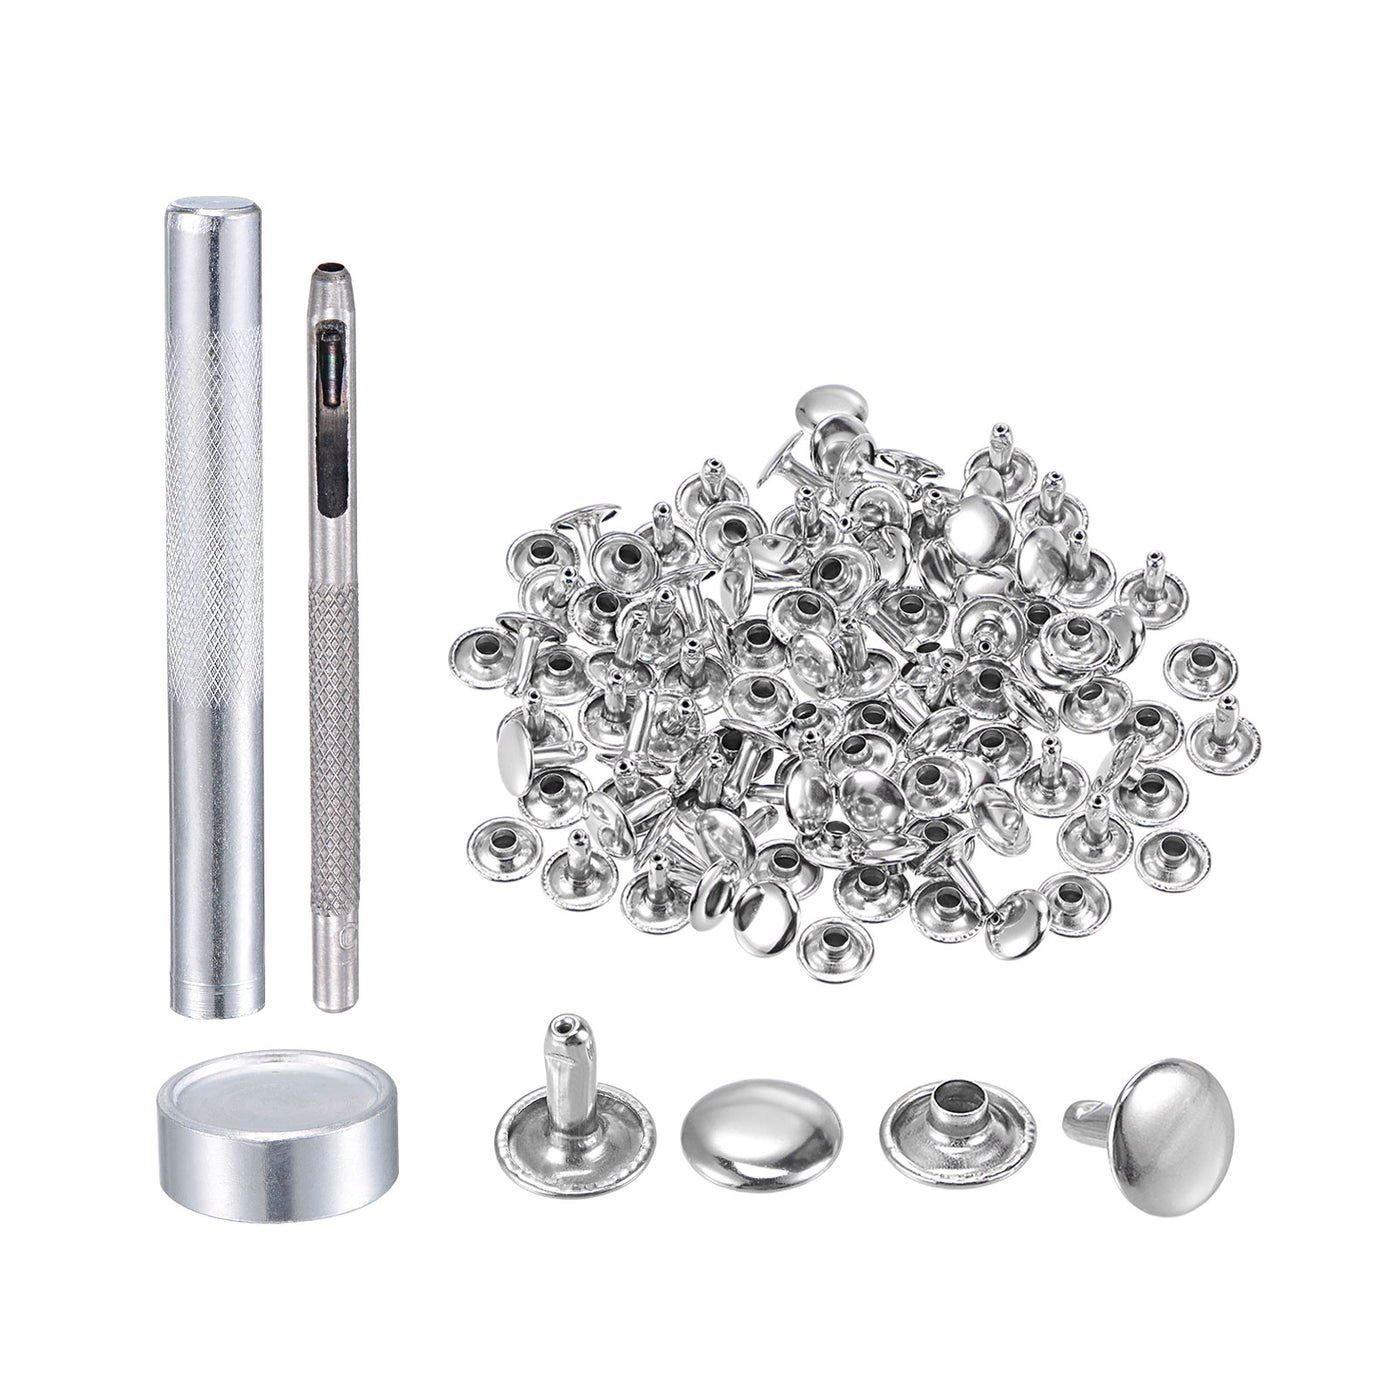 uxcell Uxcell 50 Sets Leather Rivets Silver Tone 10mm Brass Rivet Studs with Setting Tools